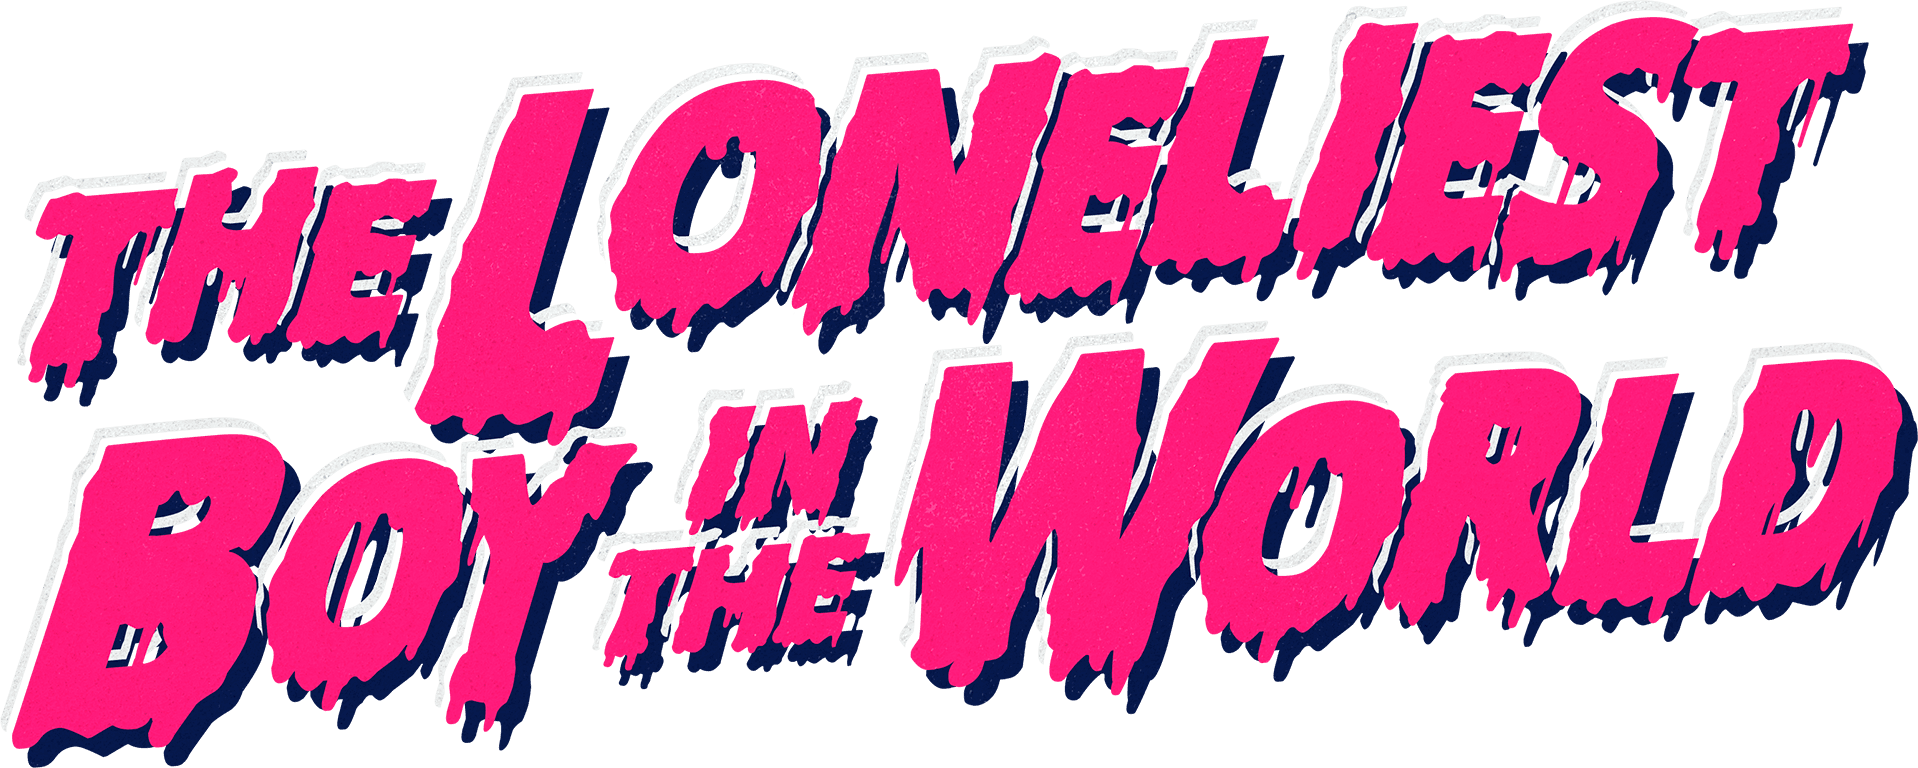 The Loneliest Boy in the World logo